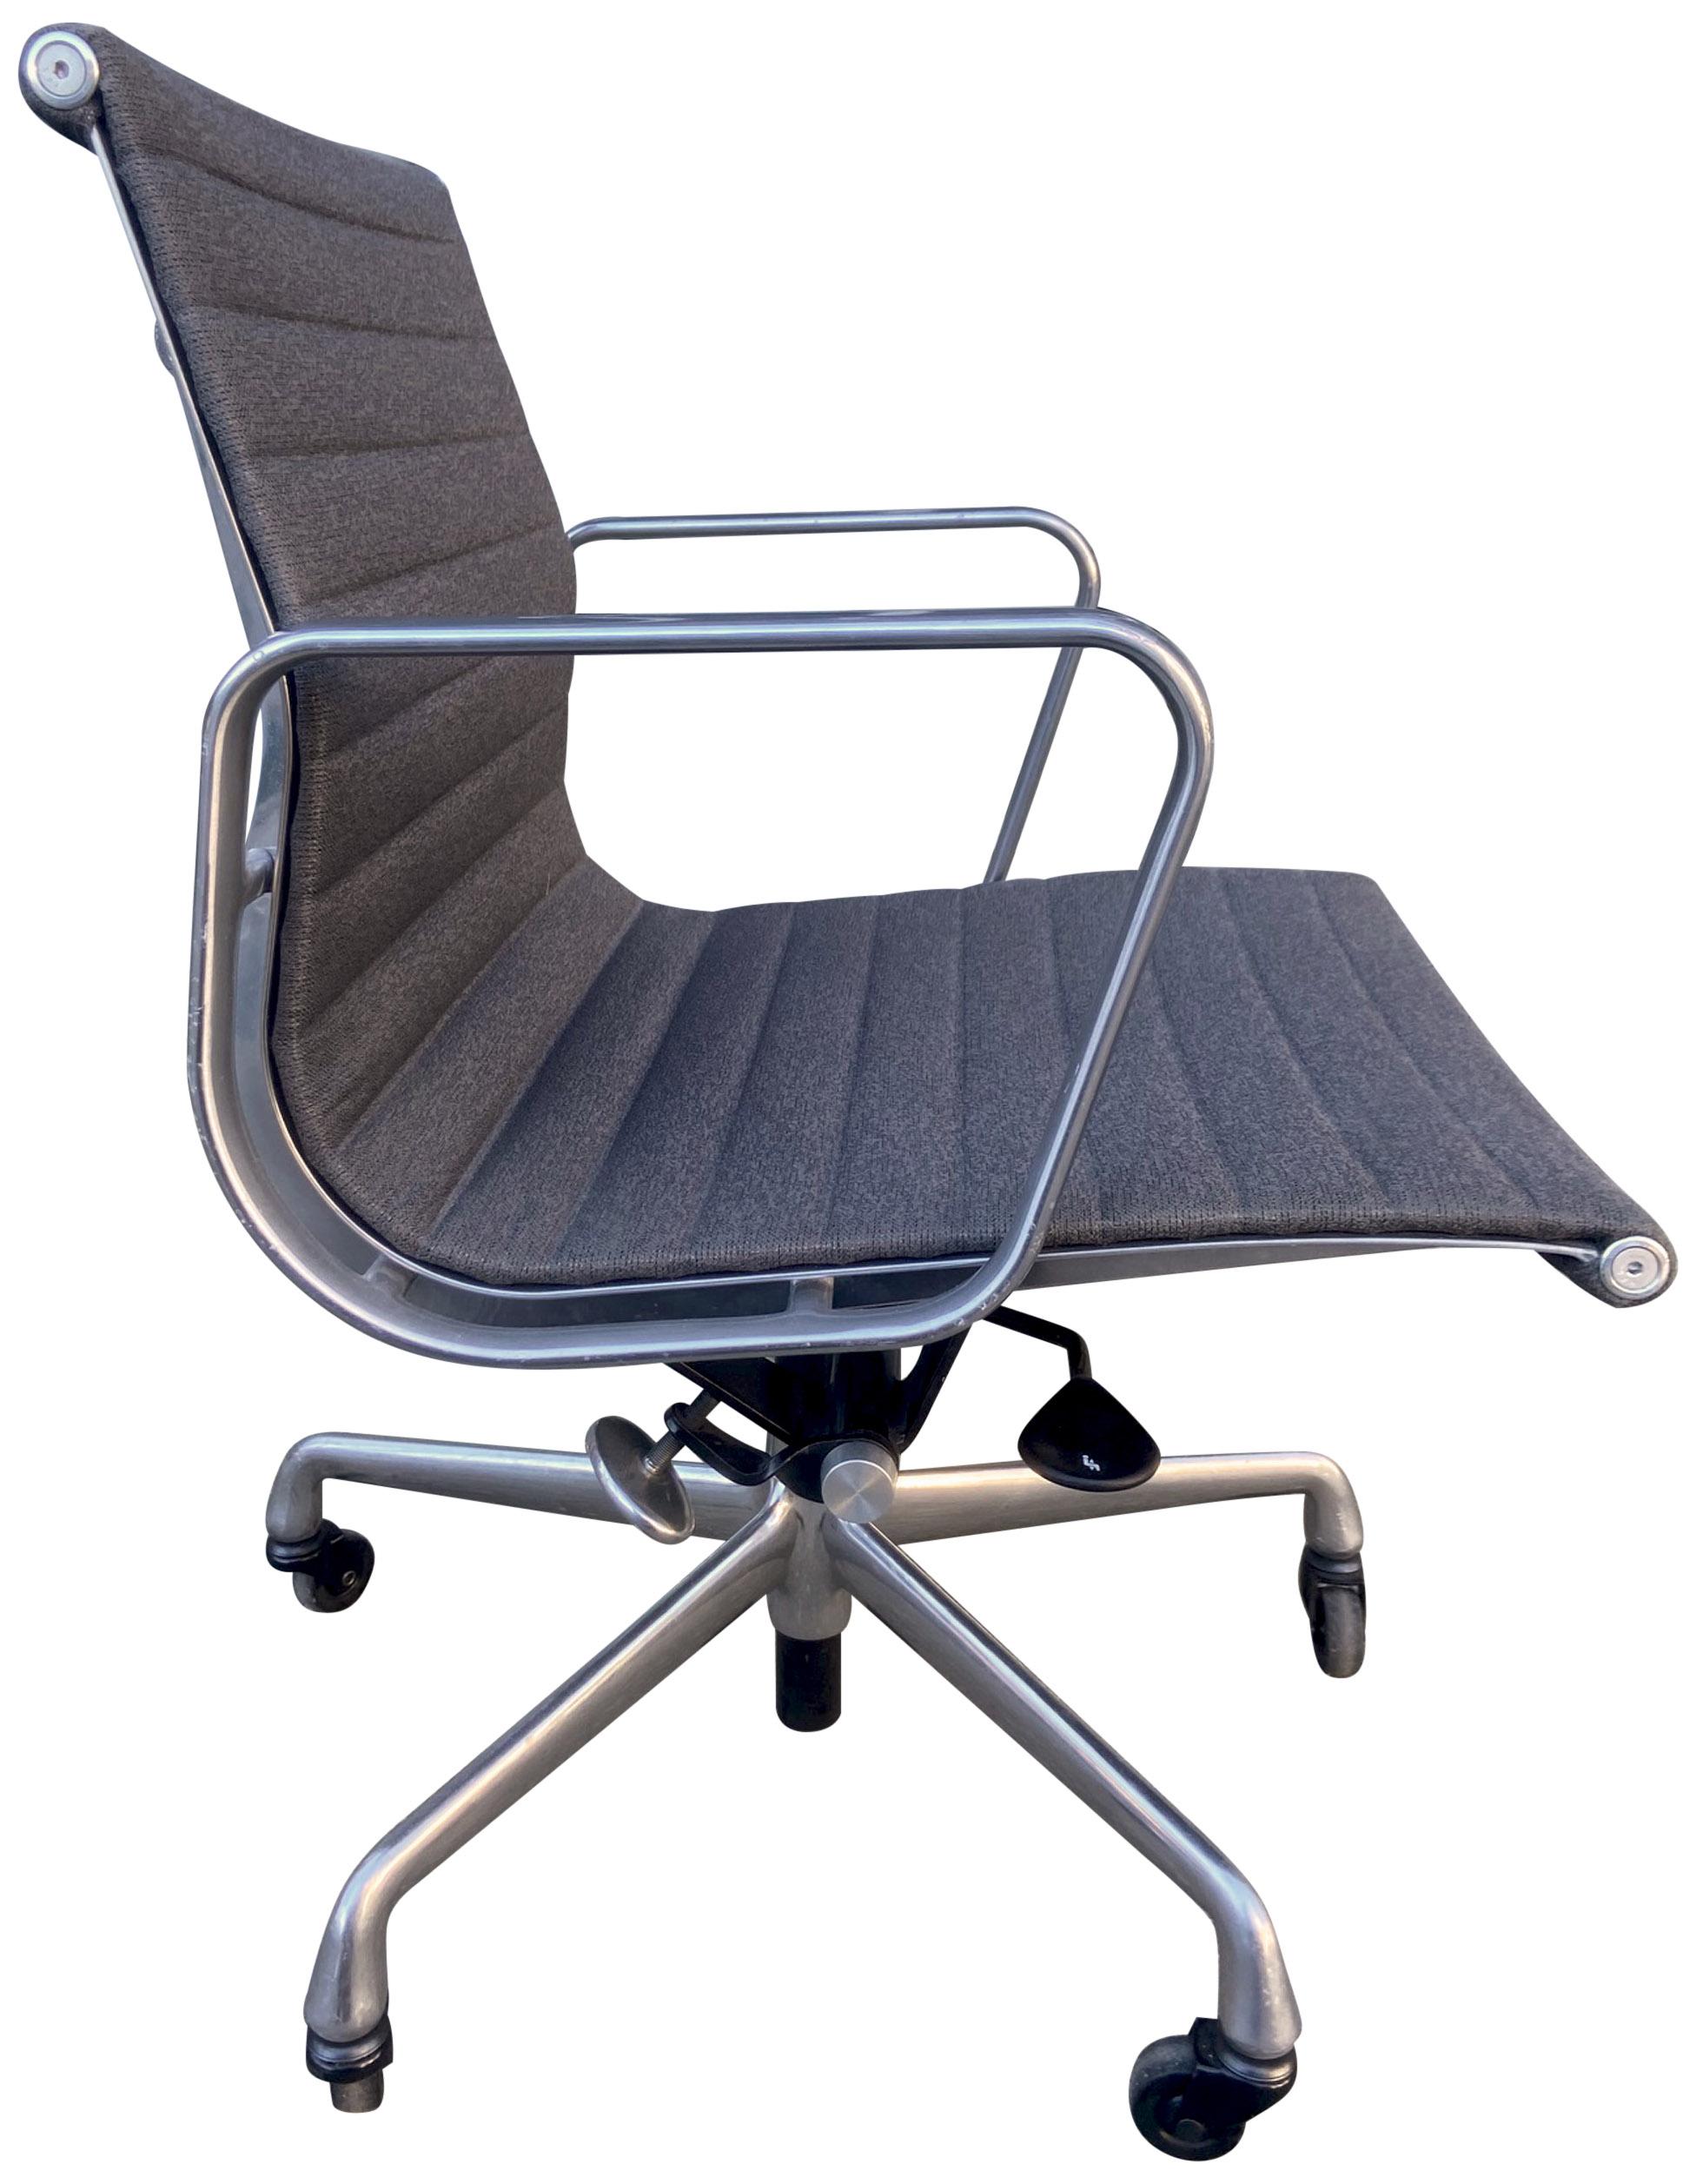 For your consideration we have up to 2 Eames for Herman Miller executive chairs in beige / light brown leather with low backs. These are more recent production 2011 with full tilt, pneumatic height adjustment, and swivel black casters. Typical marks